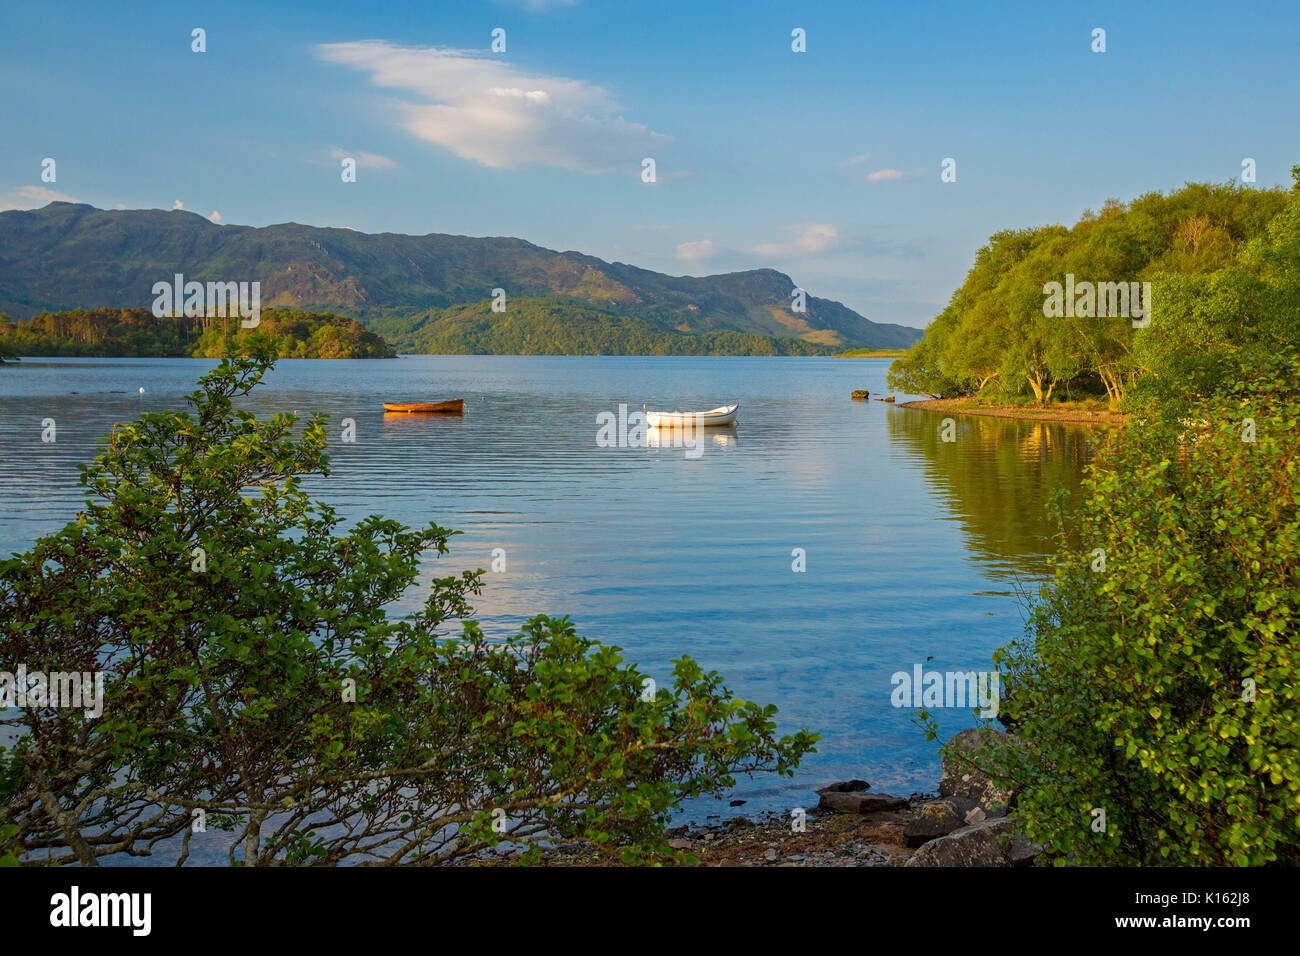 Stunning landscape with Loch Morar hemmed with rugged mountains and with boats on calm blue water under blue sky in Scotland Stock Photo